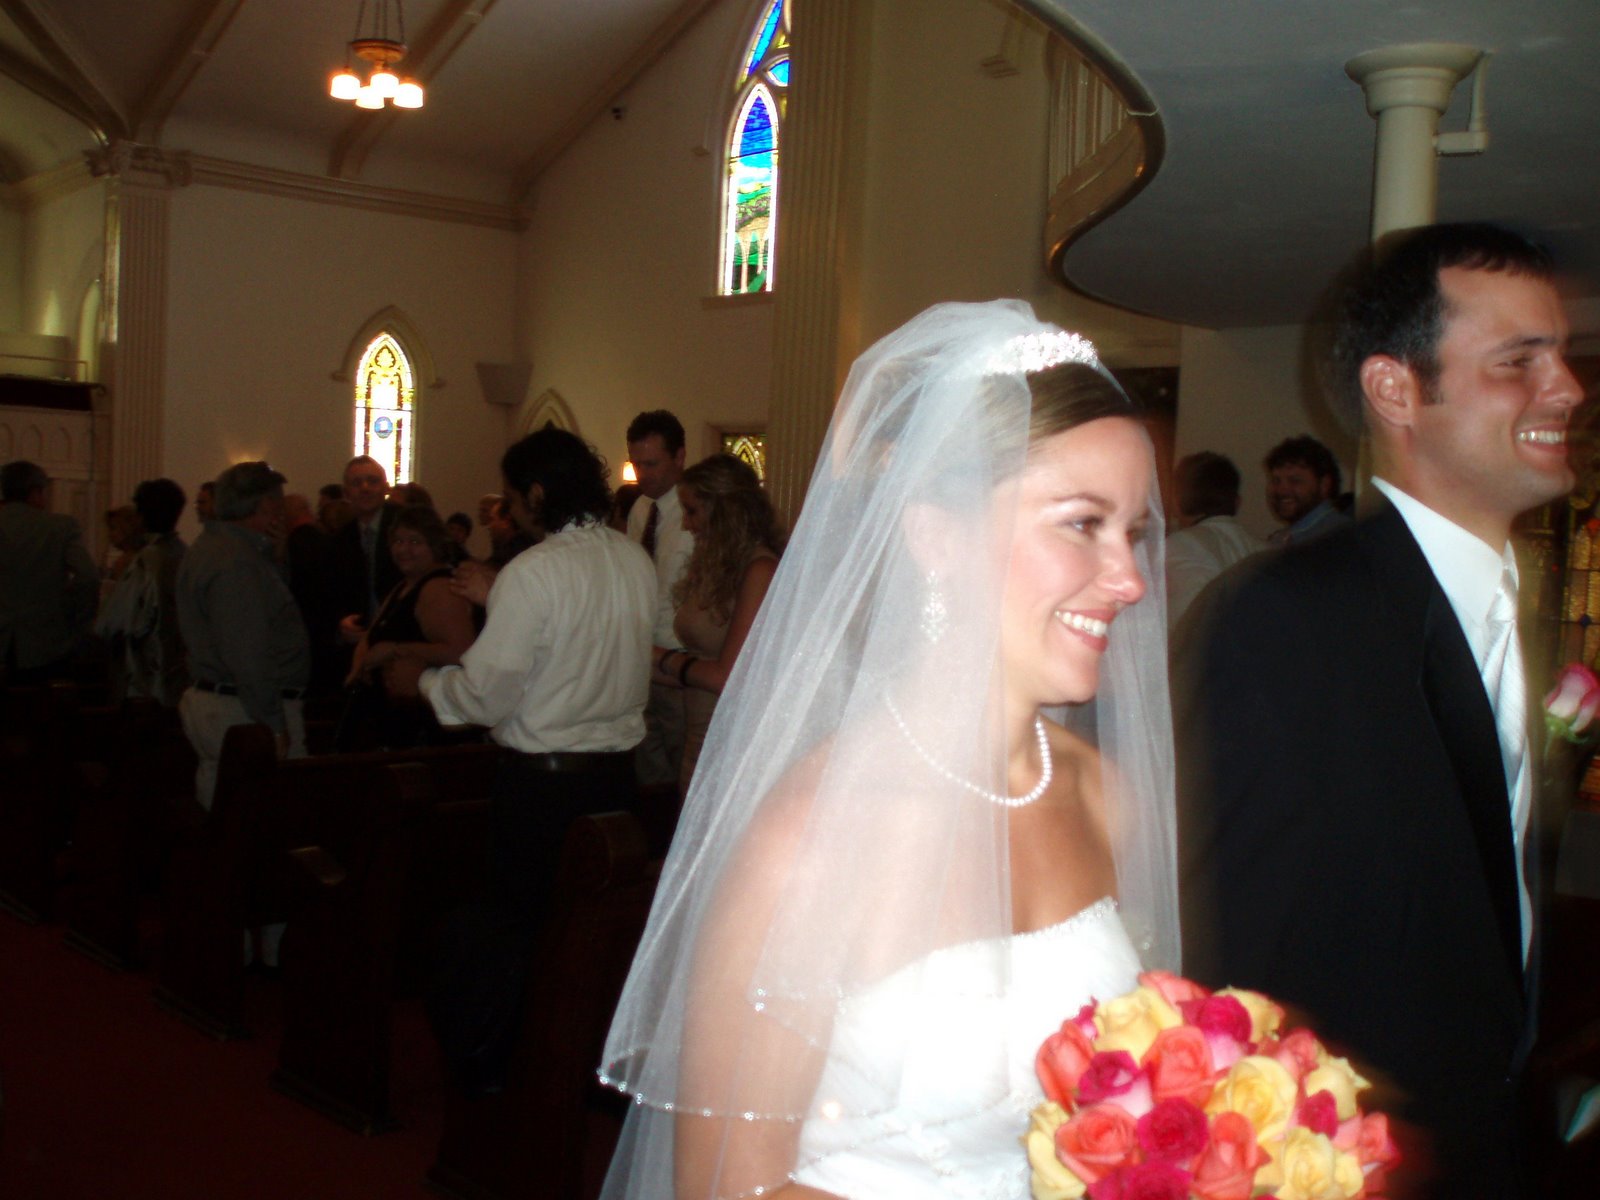 [tara+and+andy+just+married+071208.jpg]